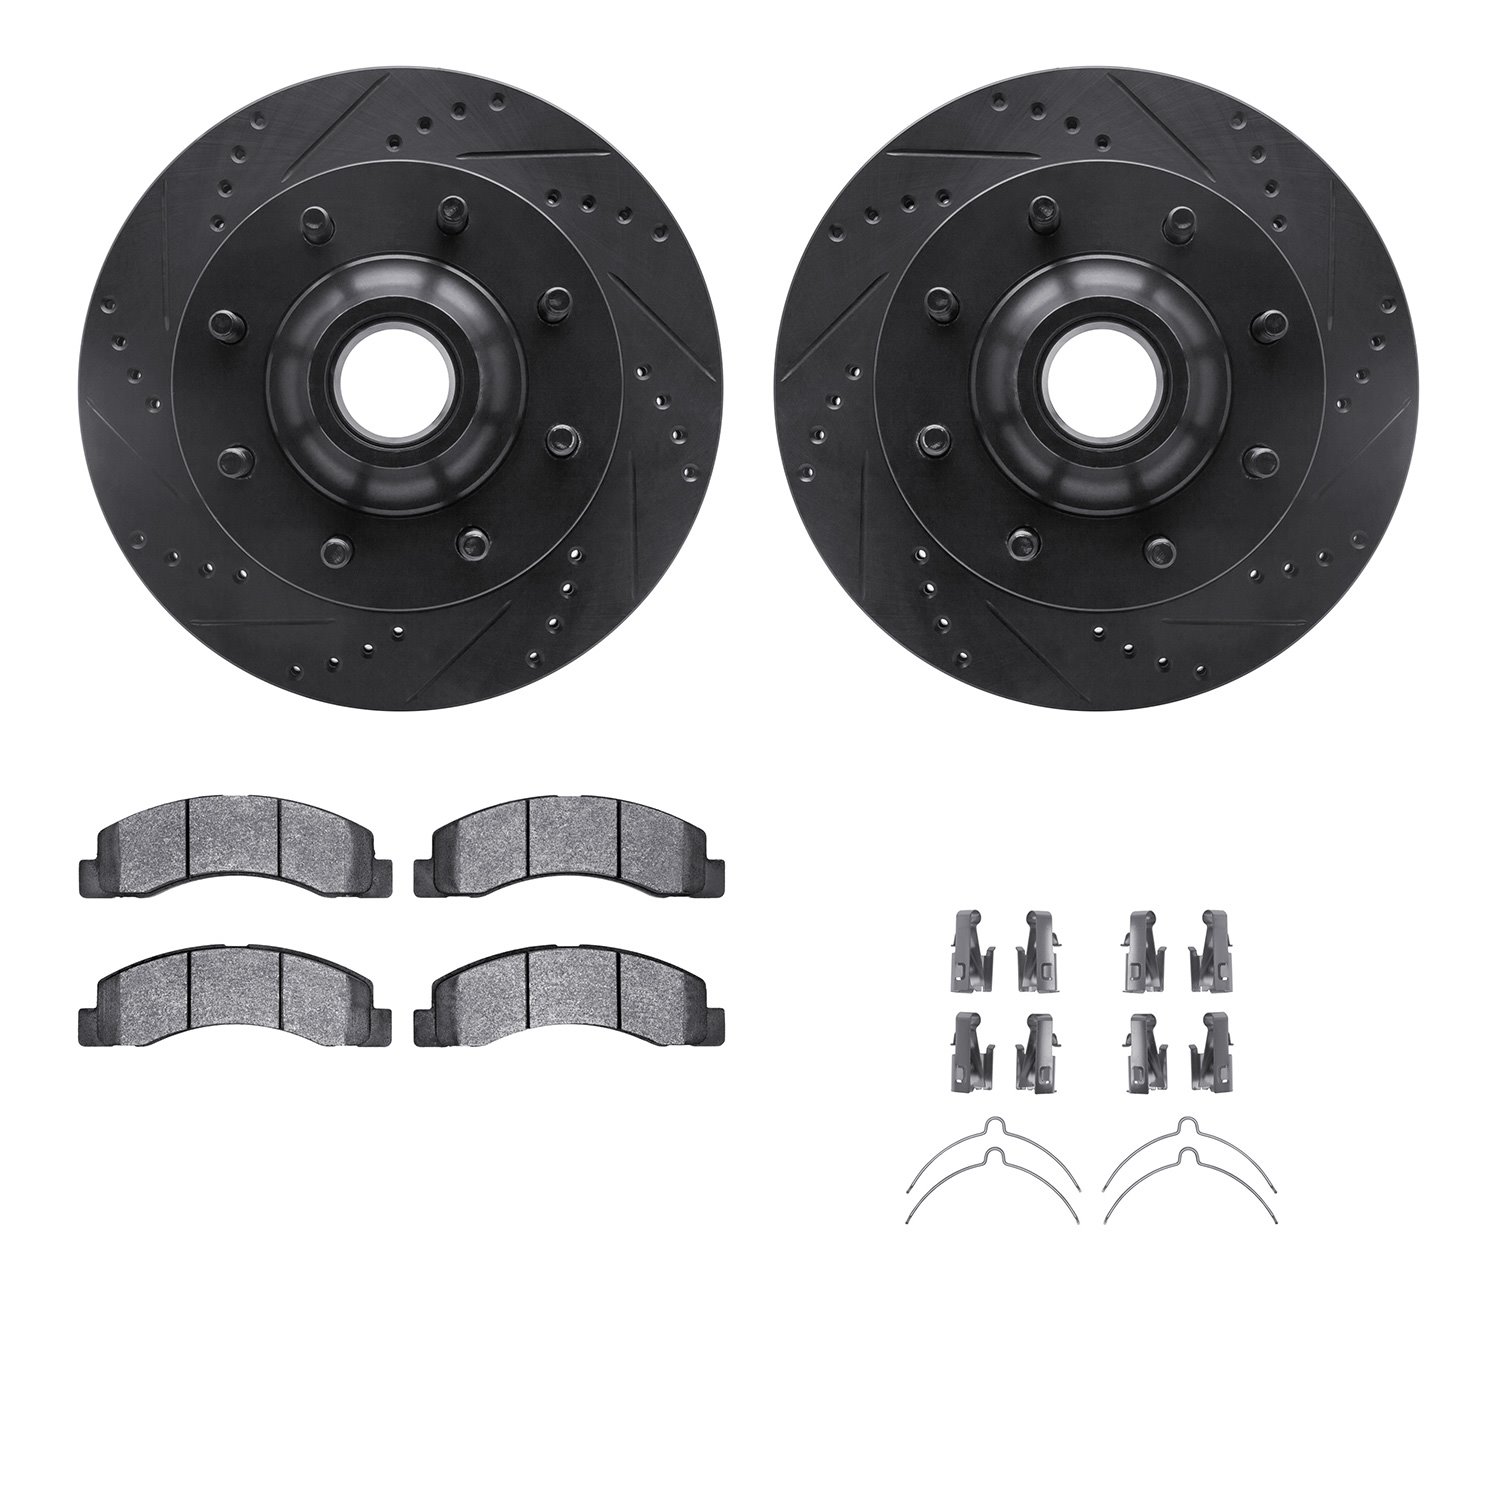 8412-54049 Drilled/Slotted Brake Rotors with Ultimate-Duty Brake Pads Kit & Hardware [Black], 1999-2002 Ford/Lincoln/Mercury/Maz